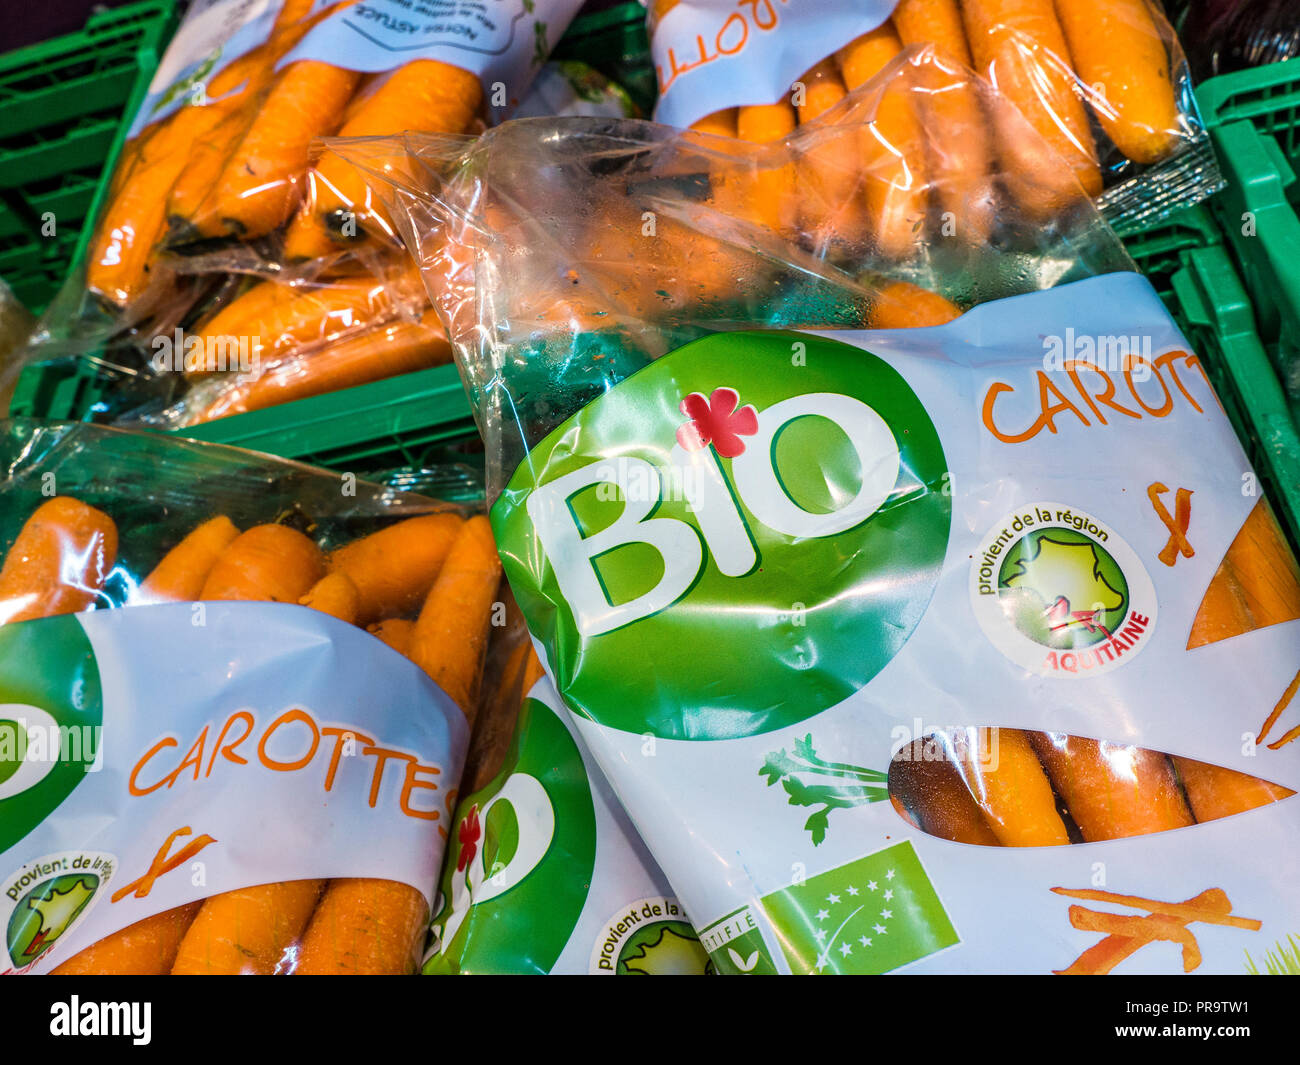 BIO Biodynamic farming techniques organic carrots (carottes) packaged on display for sale in French Intermarché Supermarket France Stock Photo